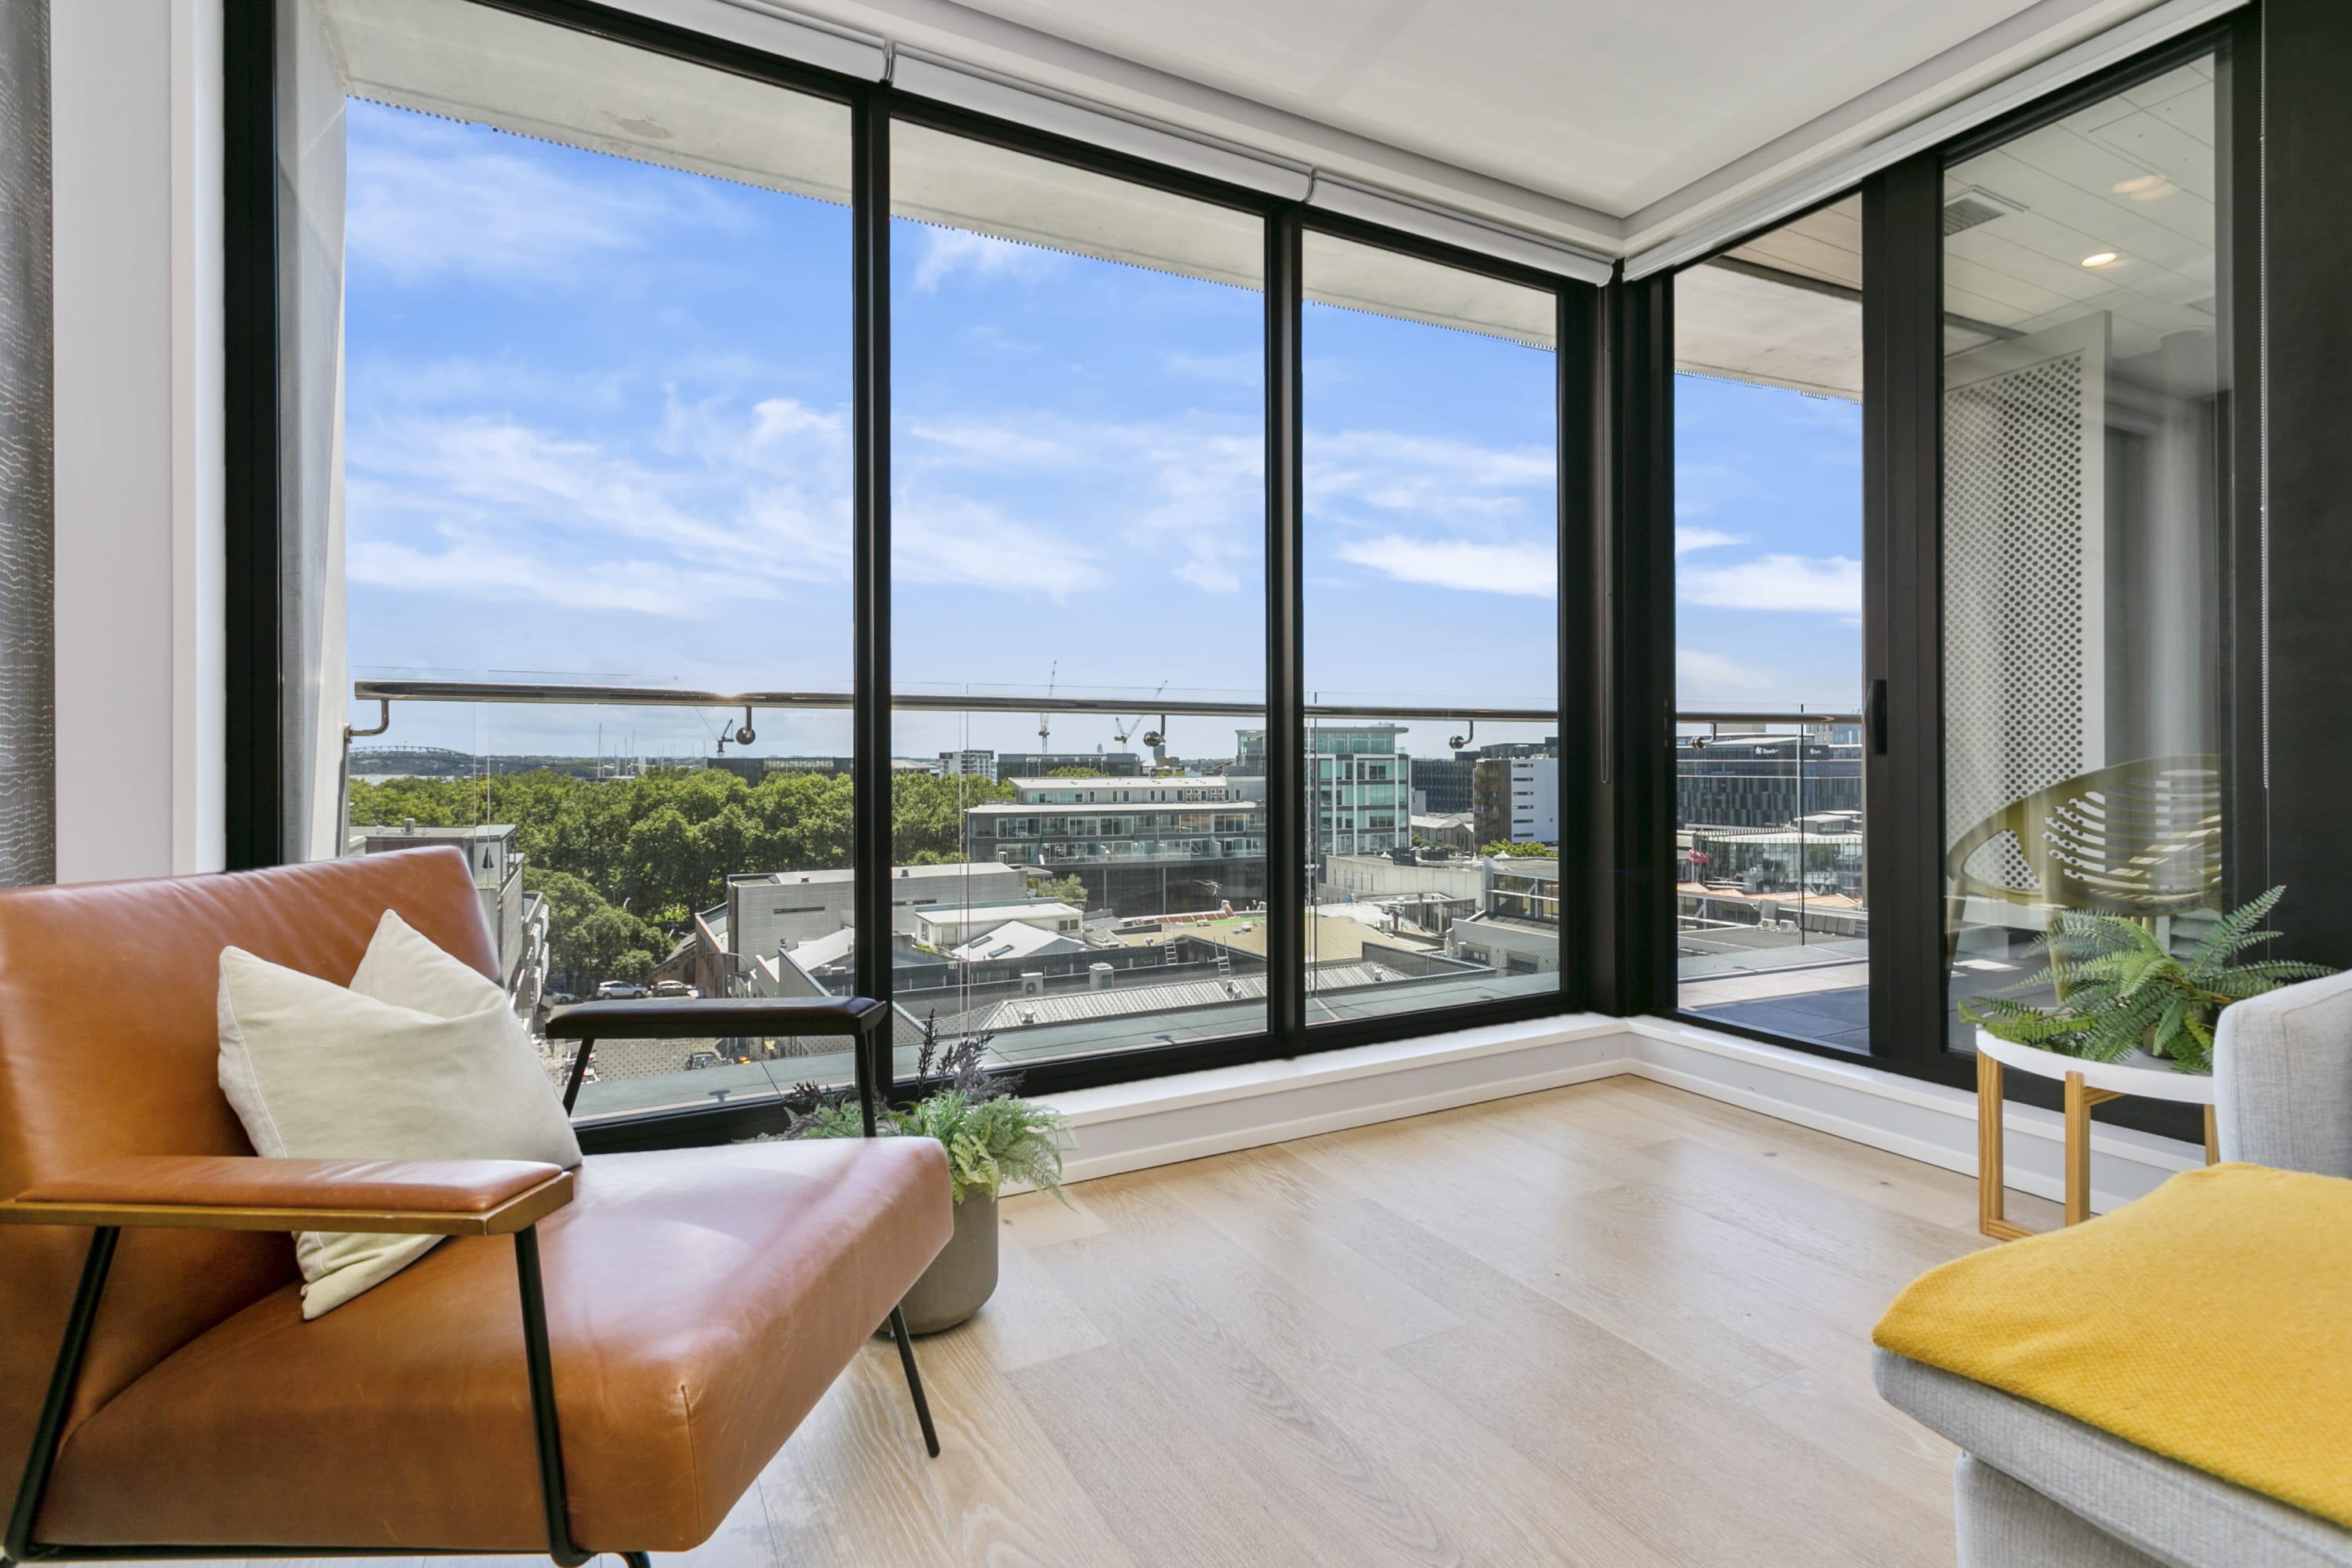 Laid back living with city views - Image 4